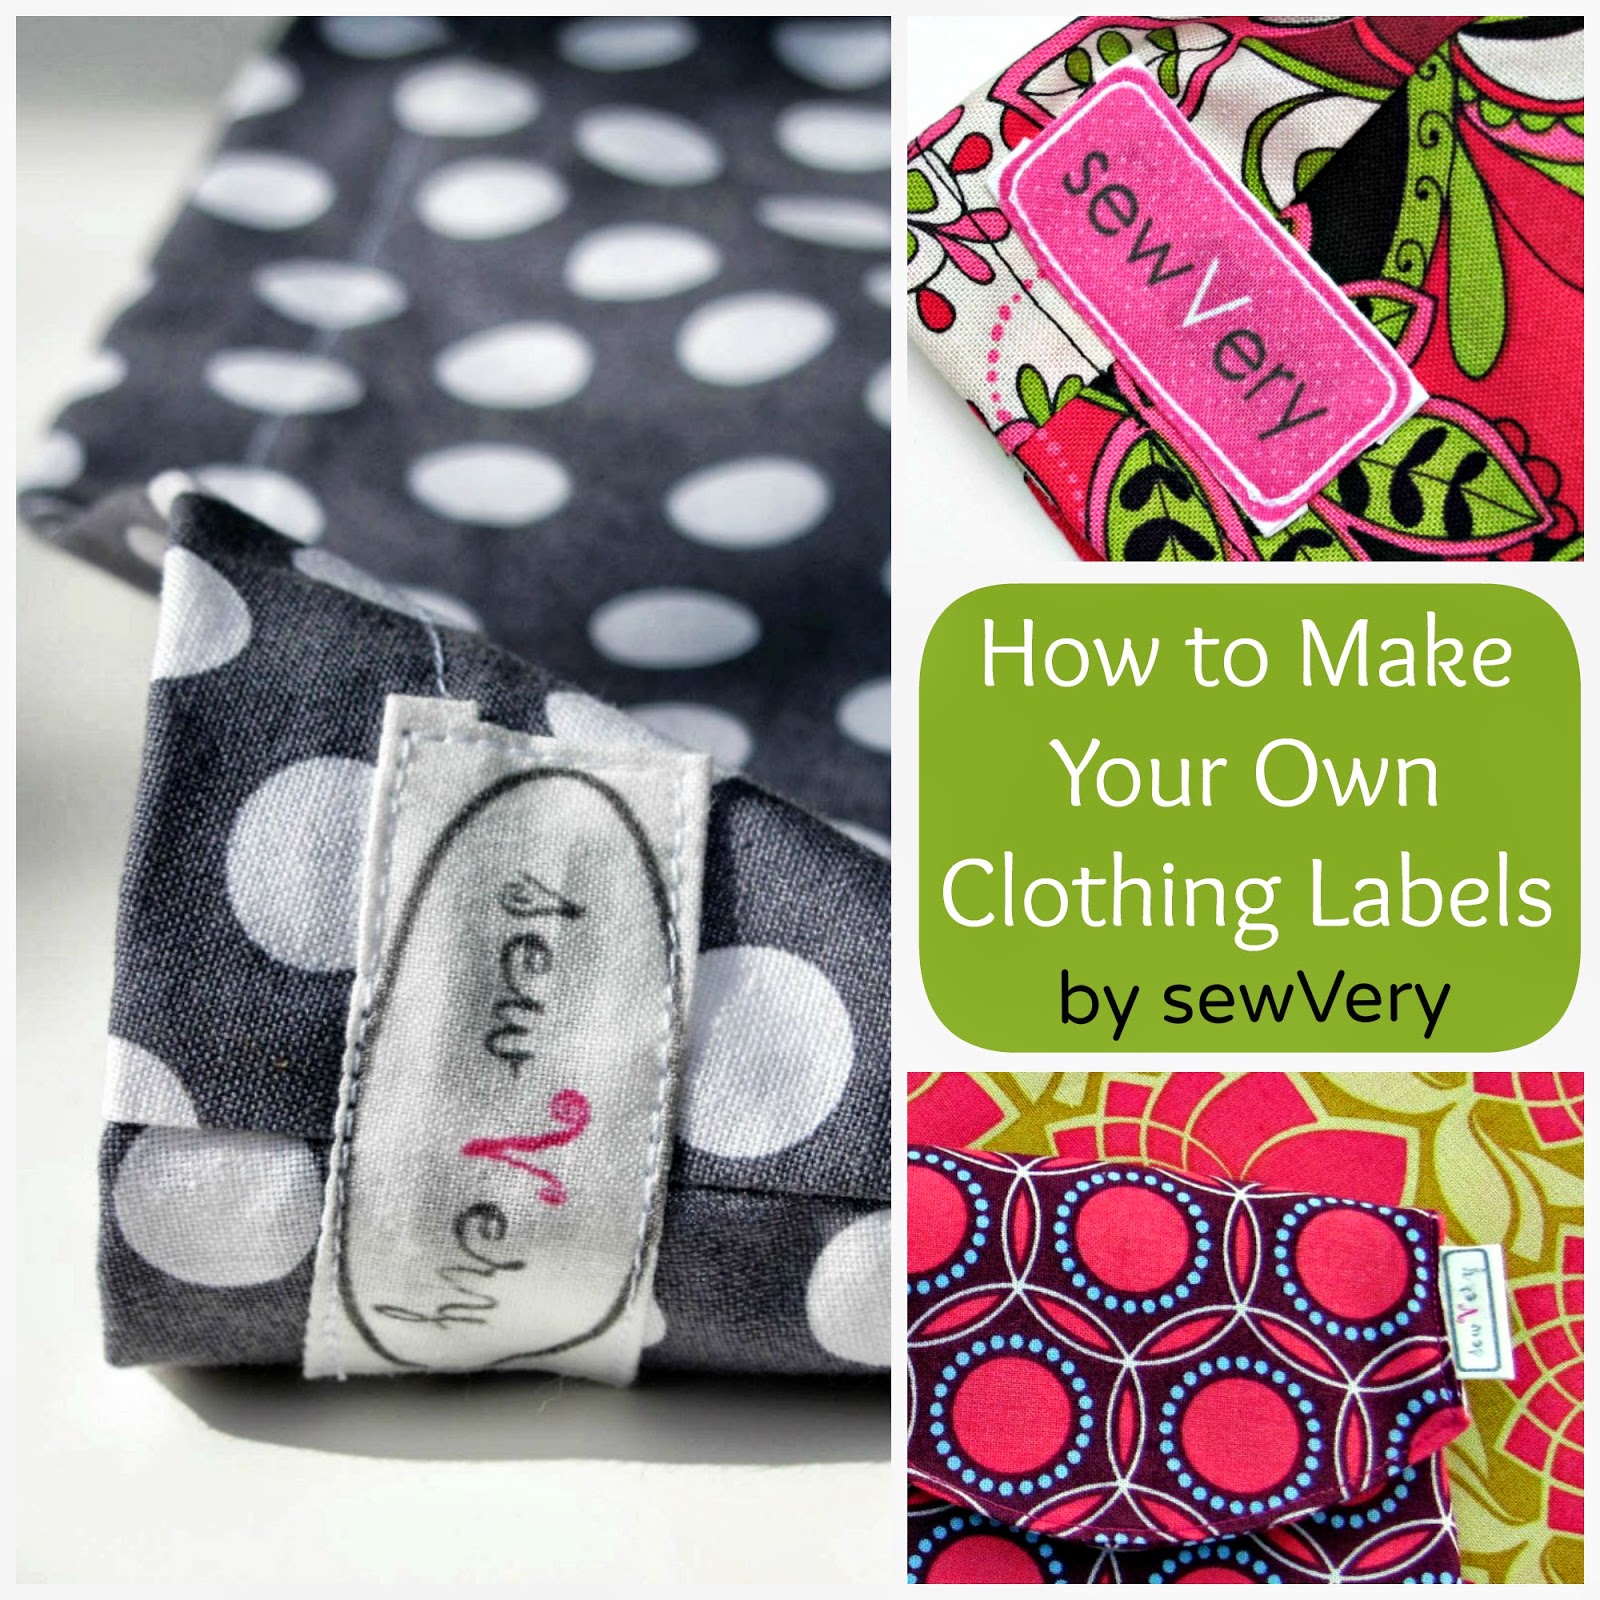 sewvery-how-to-make-your-own-clothing-labels